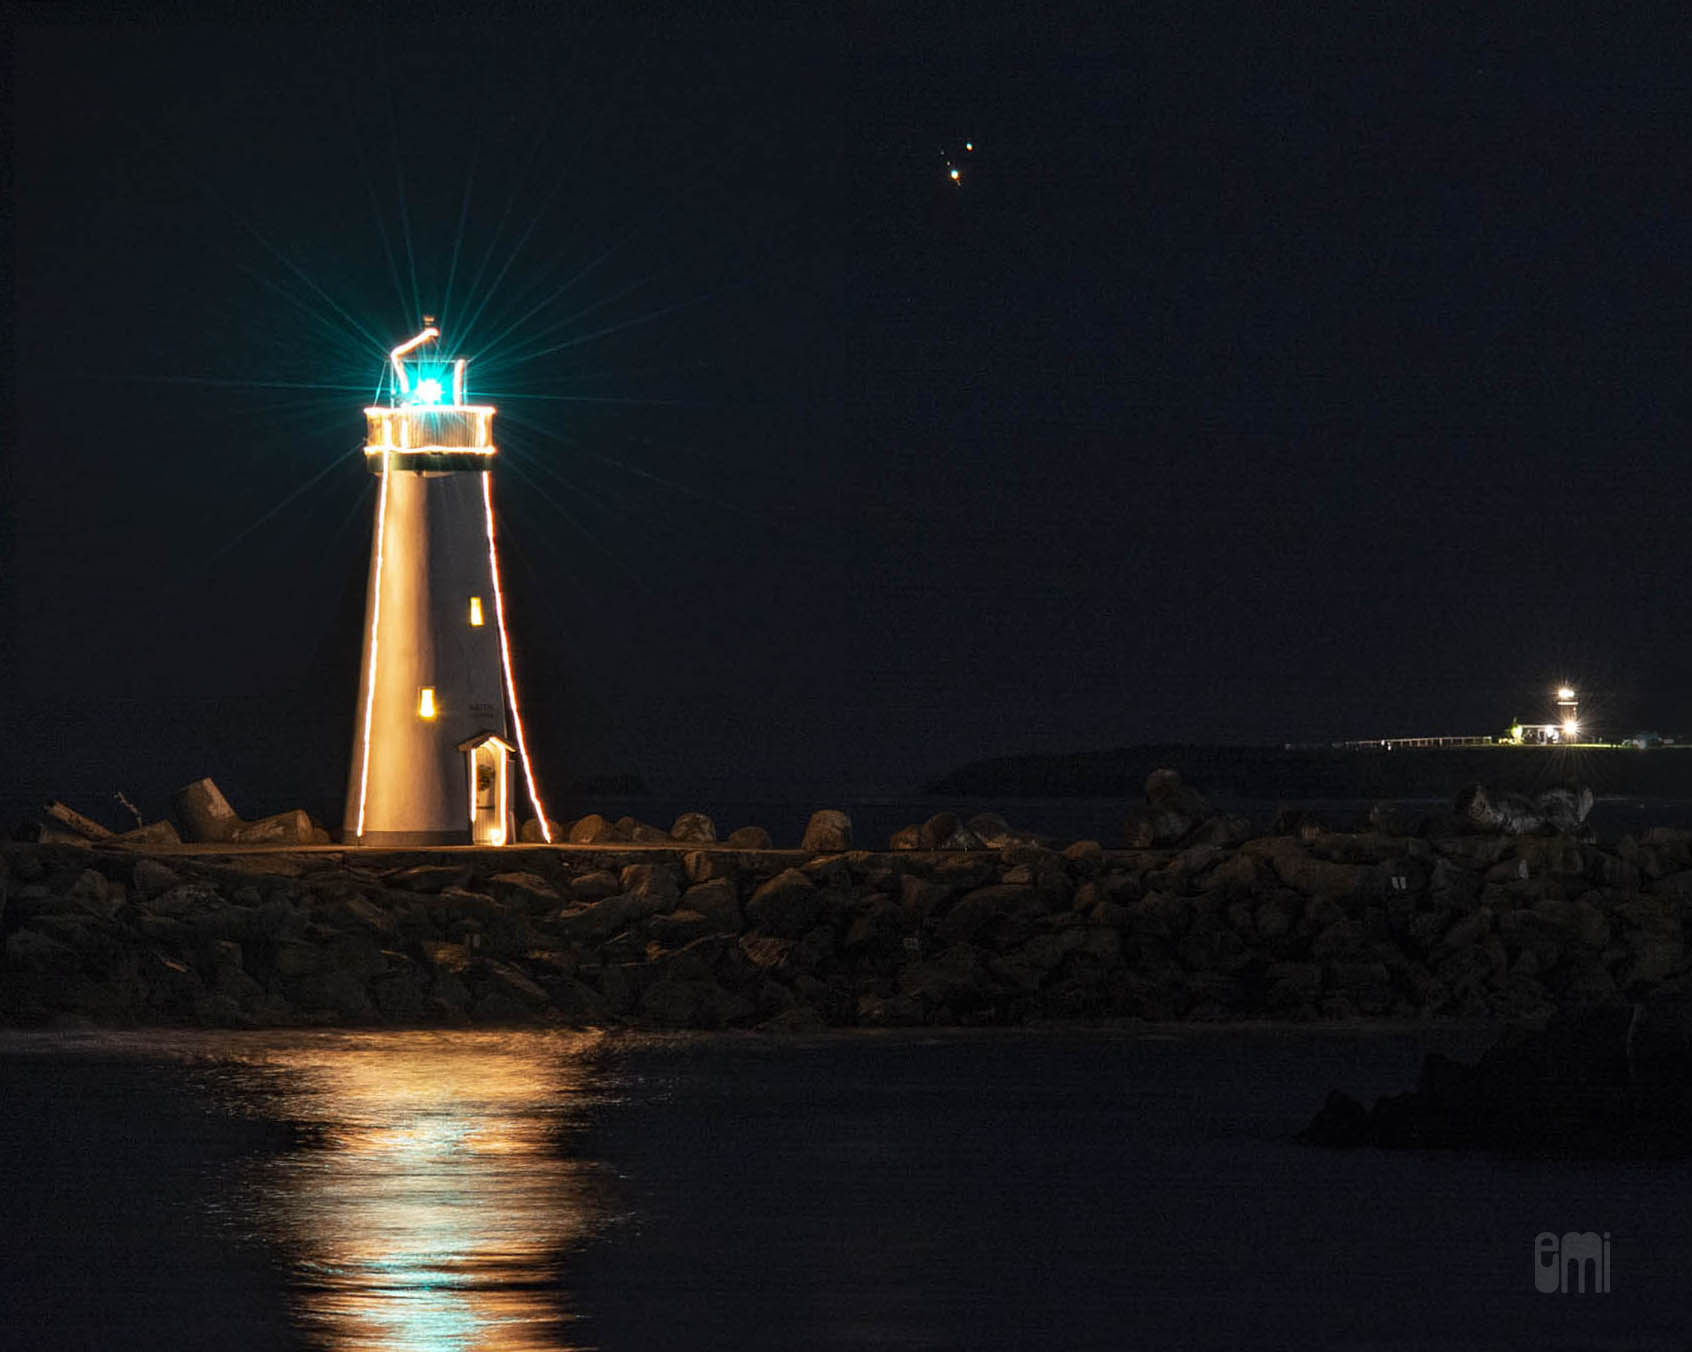 2020.12.20 The 2020 Great Conjunction of Saturn and Jupiter Lighthouse Santa Cruz, CA, photo by emi